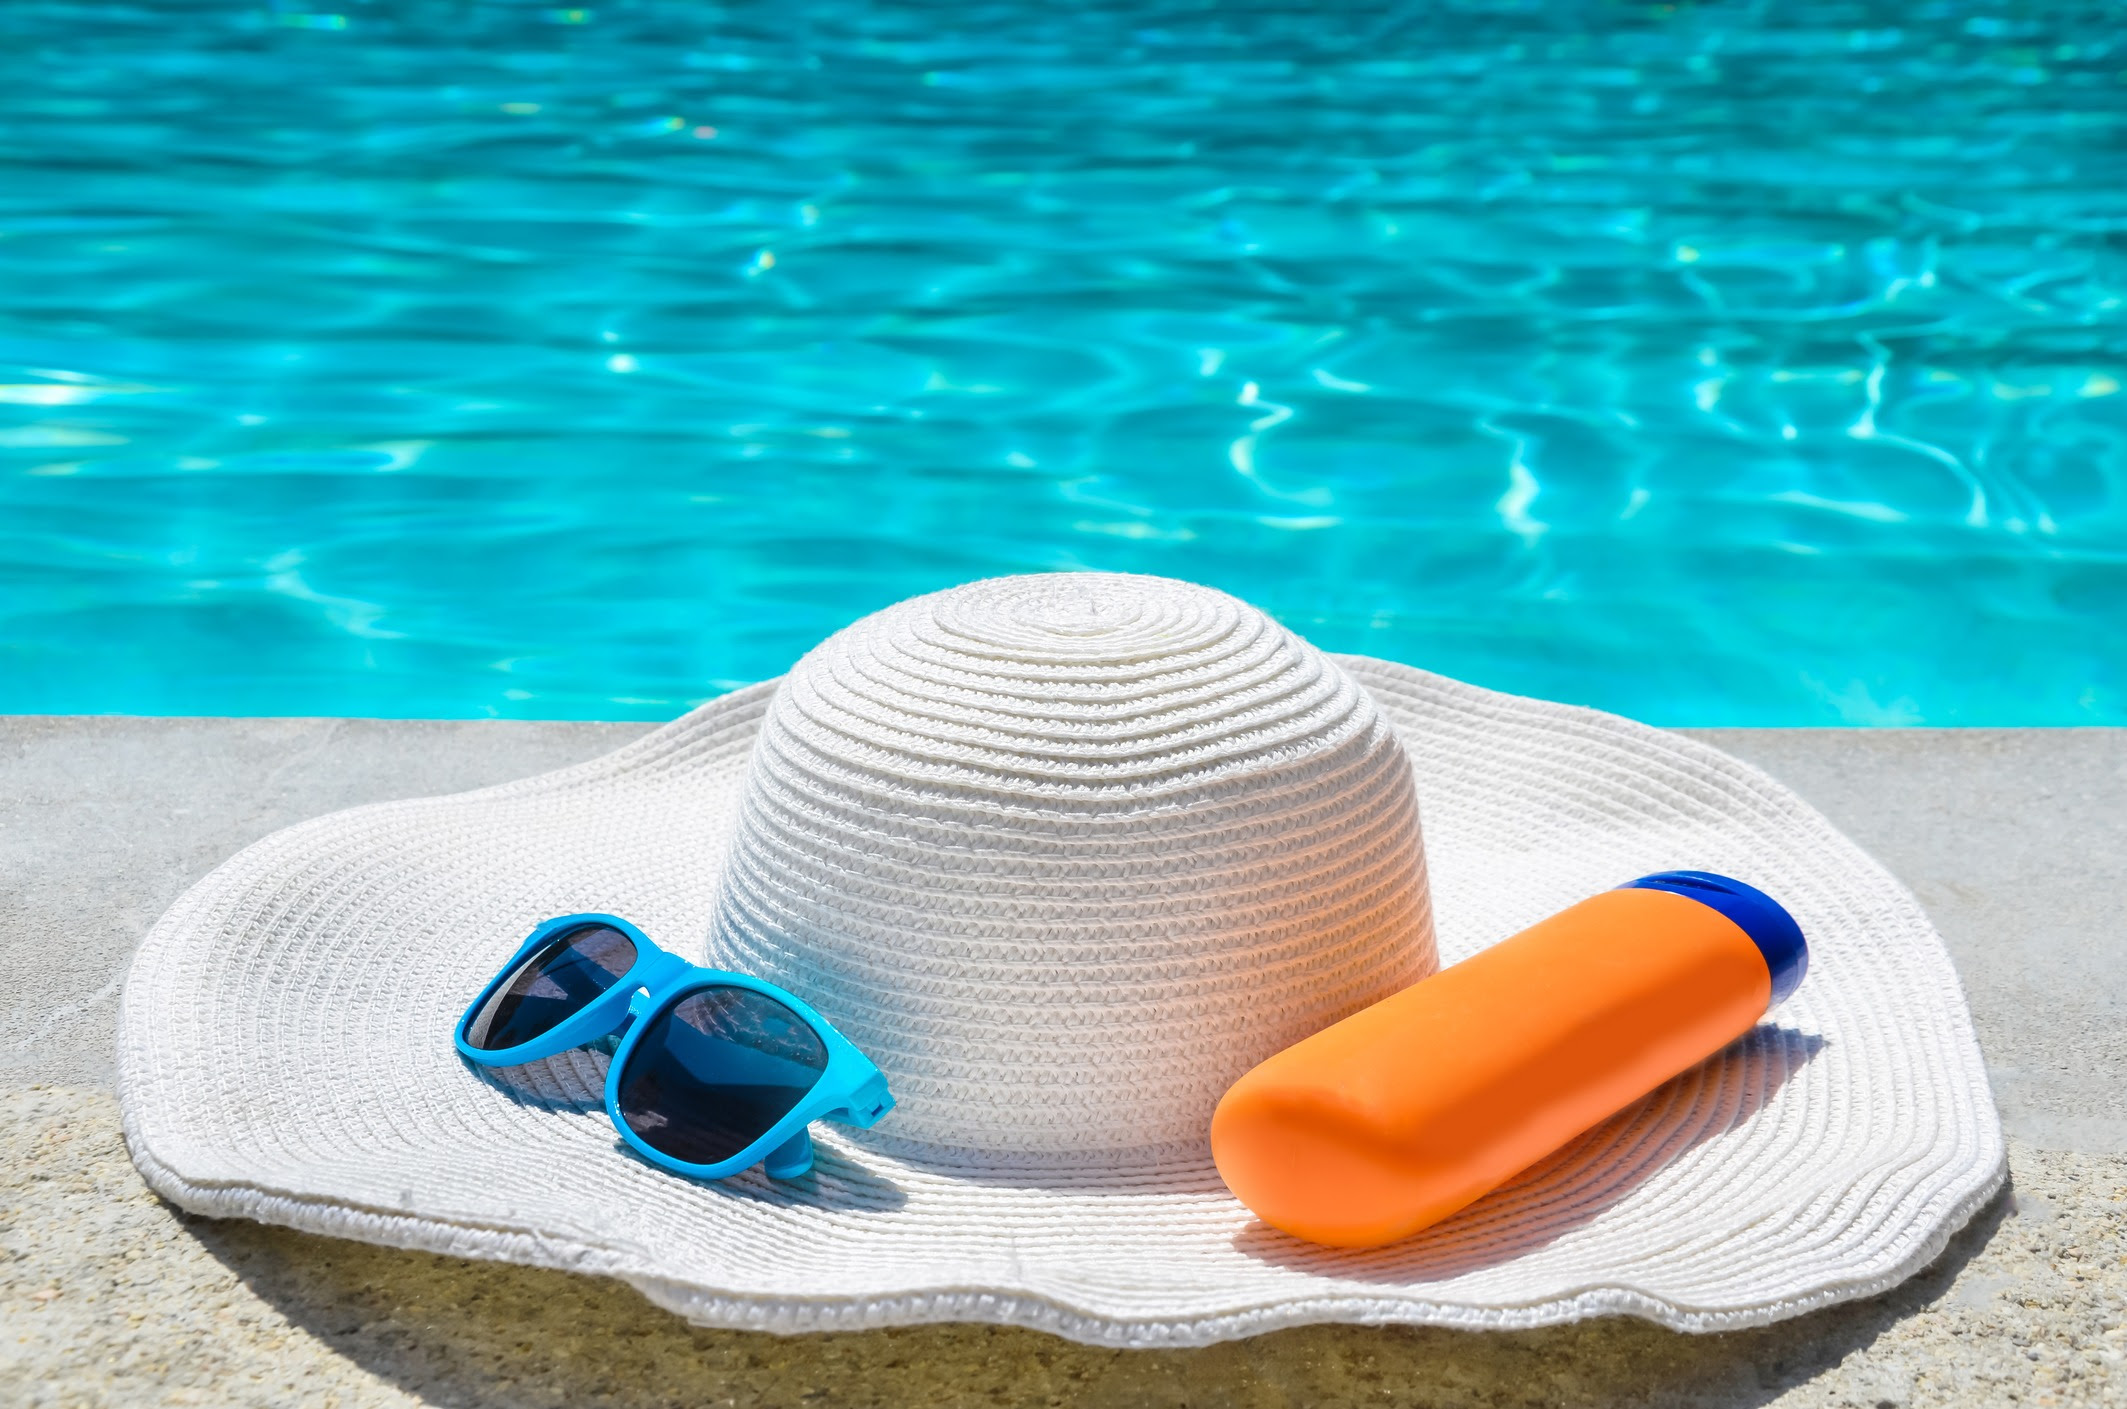 Hat, sunscreen, and sunglasses near a pool